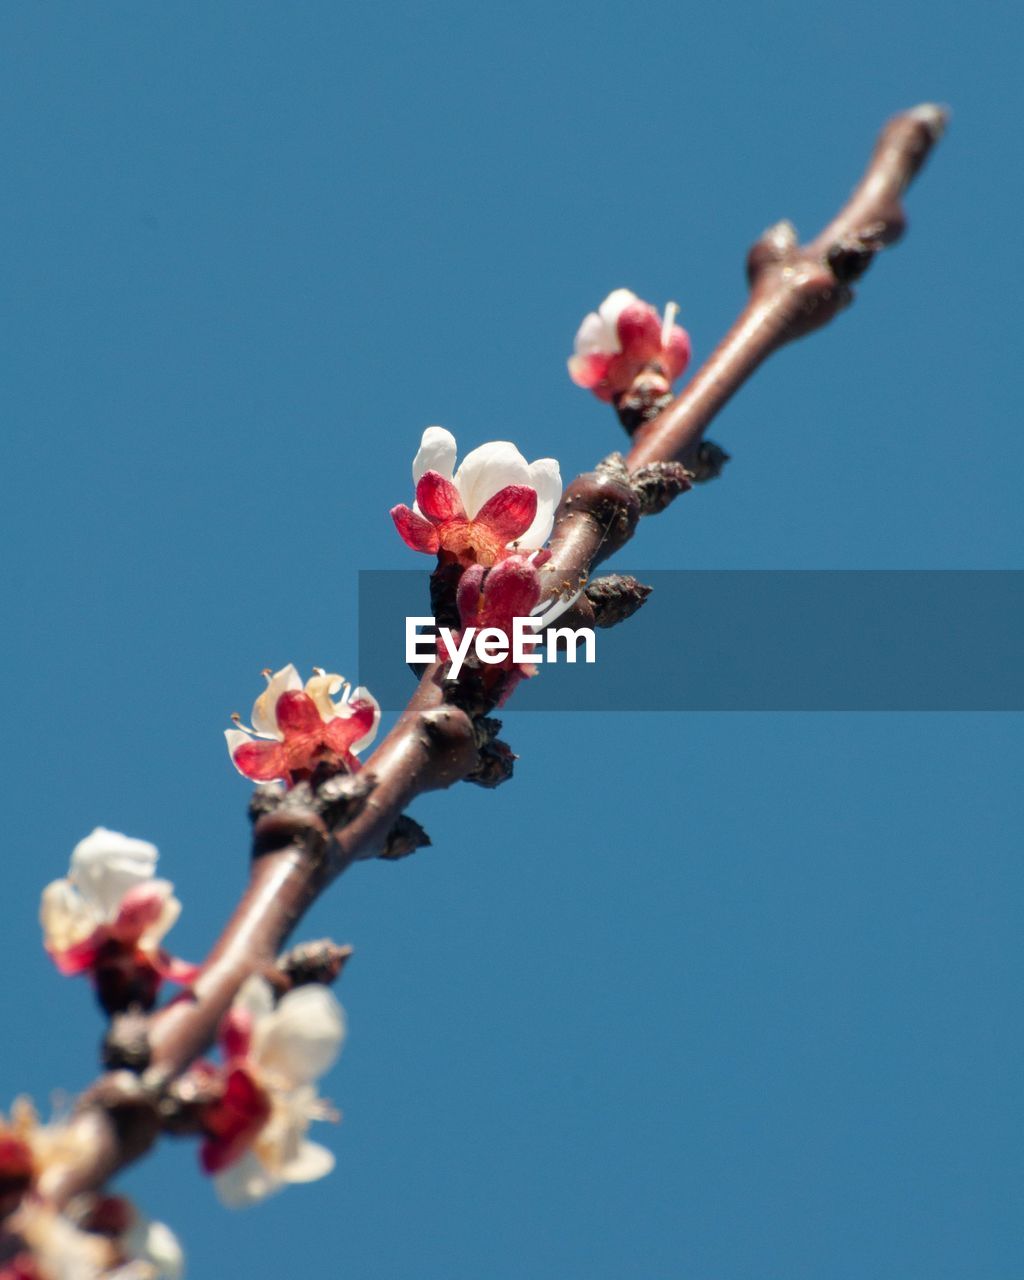 plant, flower, blossom, flowering plant, nature, growth, beauty in nature, spring, freshness, blue, sky, fragility, branch, clear sky, tree, day, springtime, close-up, no people, macro photography, twig, outdoors, low angle view, produce, pink, sunny, bud, fruit, sunlight, food and drink, flower head, copy space, leaf